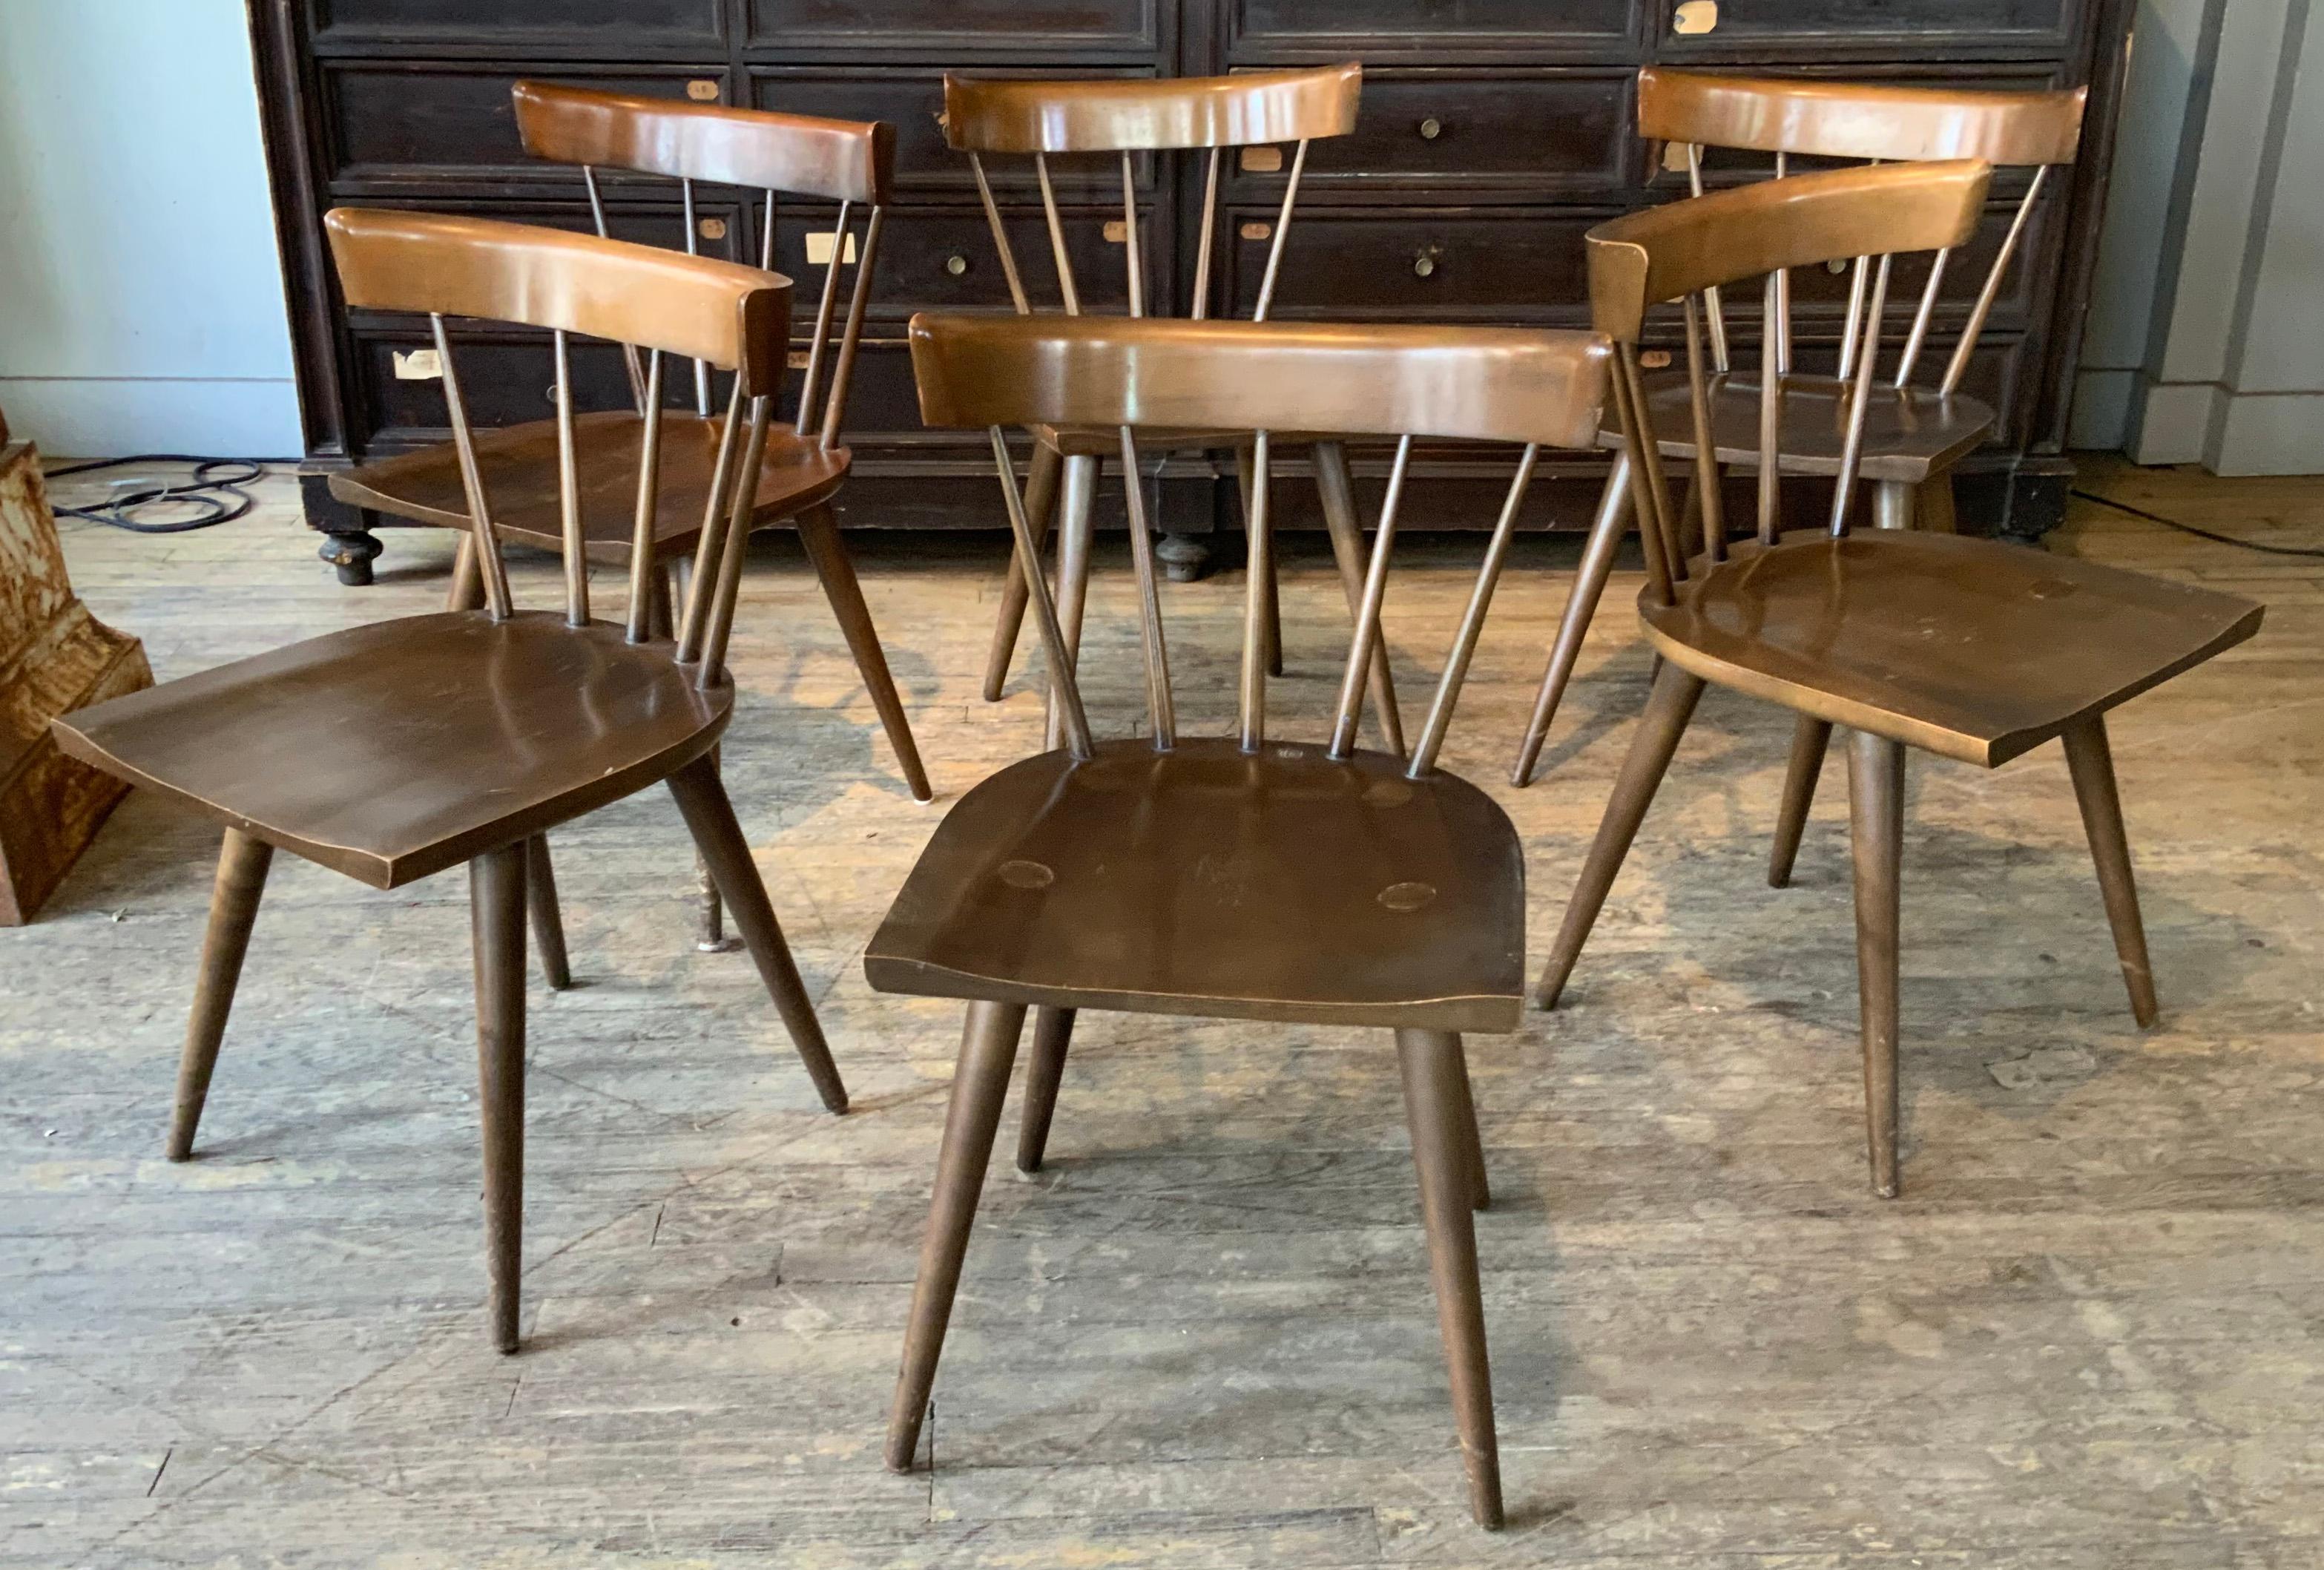 A very handsome set of six midcentury 1950s Planner Group dining chairs by Paul McCobb. 

classic McCobb birch chairs, in their original bean brown finish, which shows age expected wear.

a rare chance to own an original matched set of six of